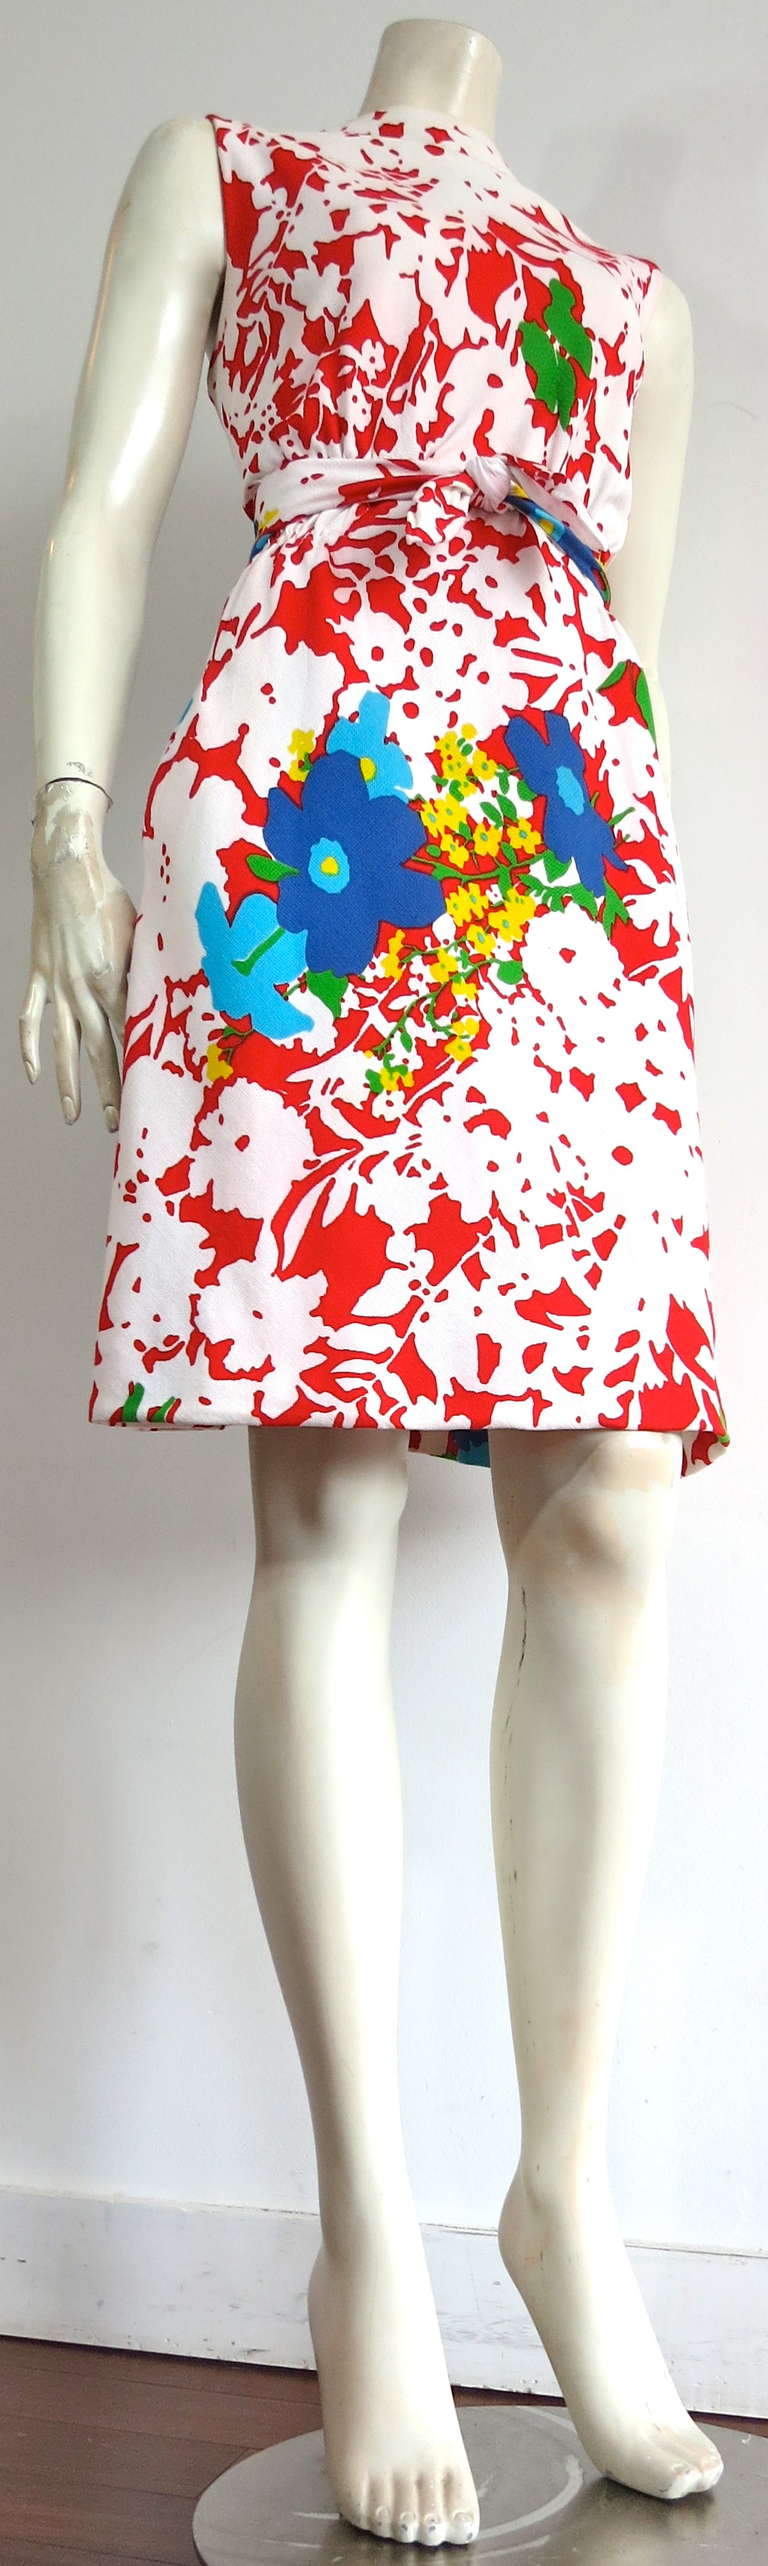 Vintage PAULINE TRIGERE Floral print dress.

This adorable, colorful dress was designed by Pauline Trigere during the 1960's, and is made in the USA.

The red and white floral base artwork features multi-color 'bouquets' throughout the